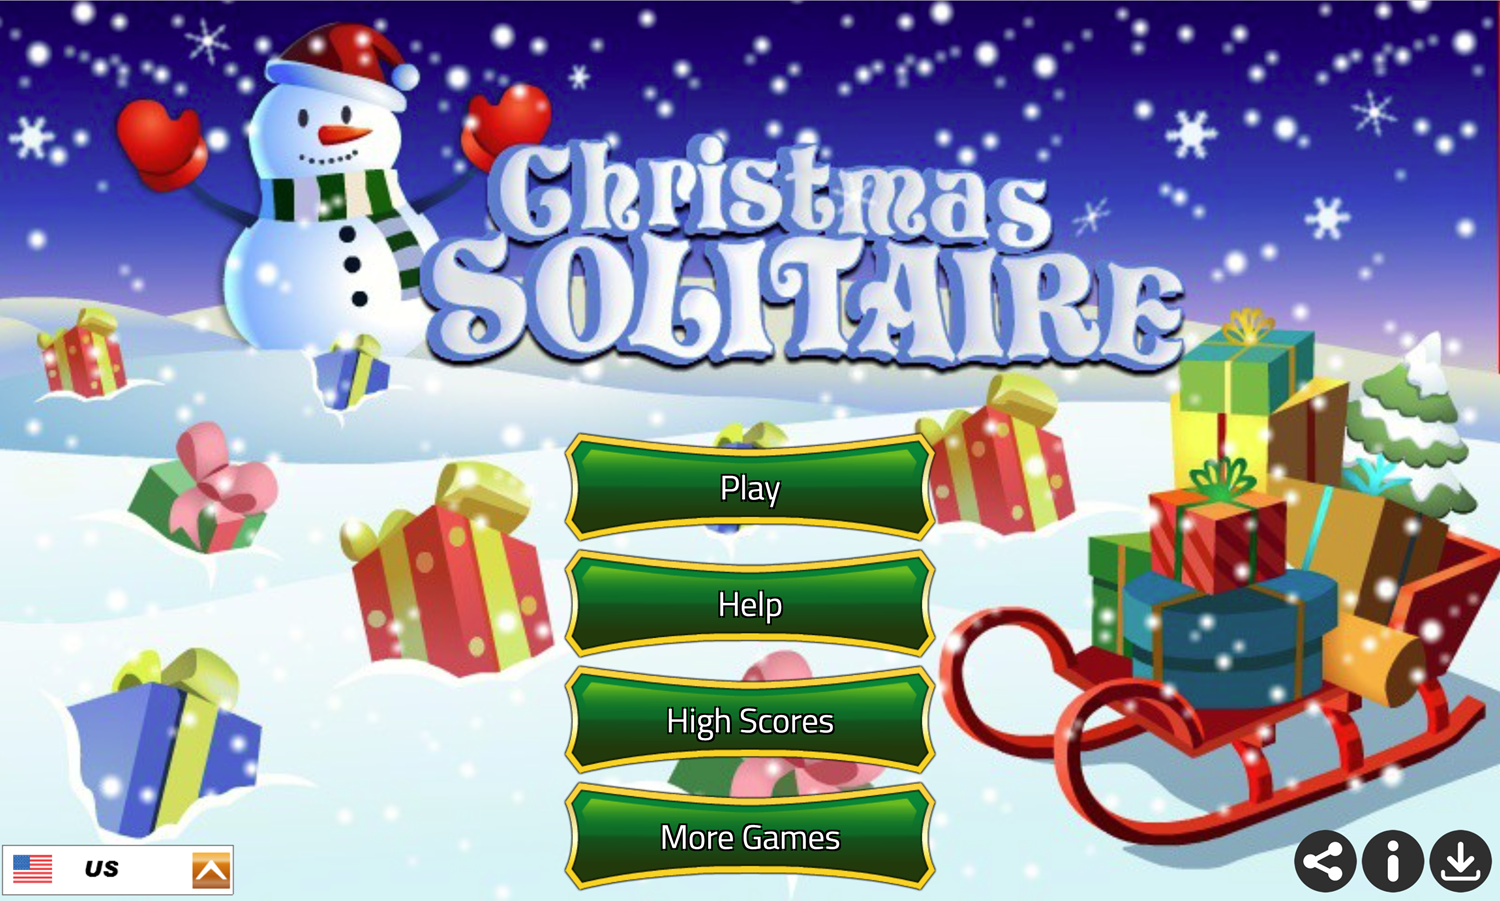 Christmas Solitaire Game Welcome Screen Screenshot.